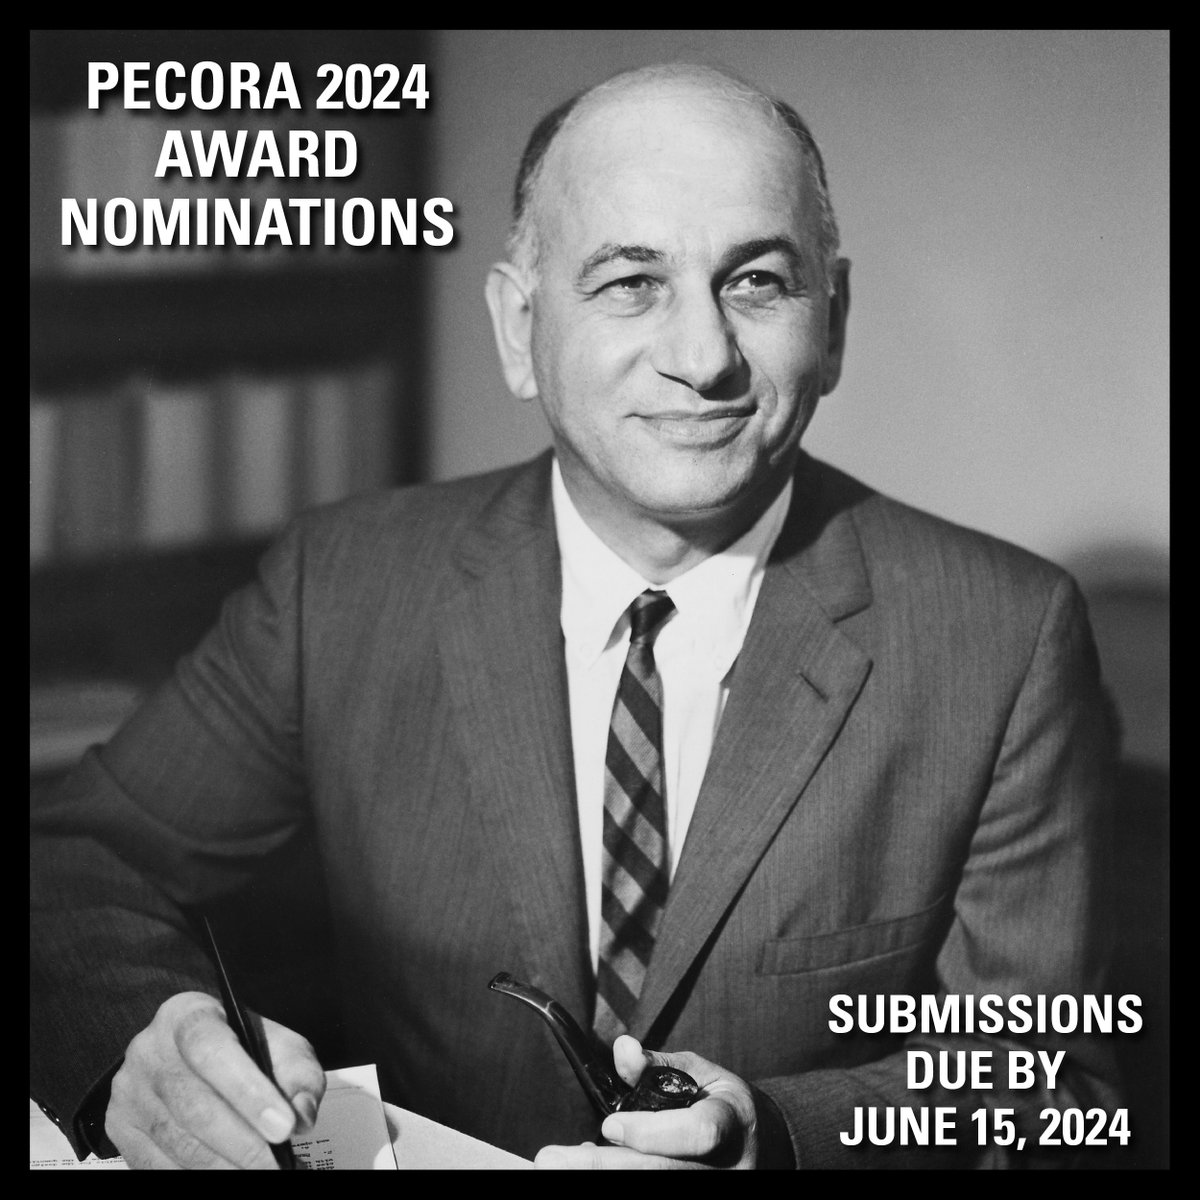 Consider who you’ll nominate for the Pecora 2024 Awards! Any individual or group who has made significant contributions in satellite or aerial remote sensing of the Earth is eligible. Learn more here: ow.ly/o6S050RzUiv